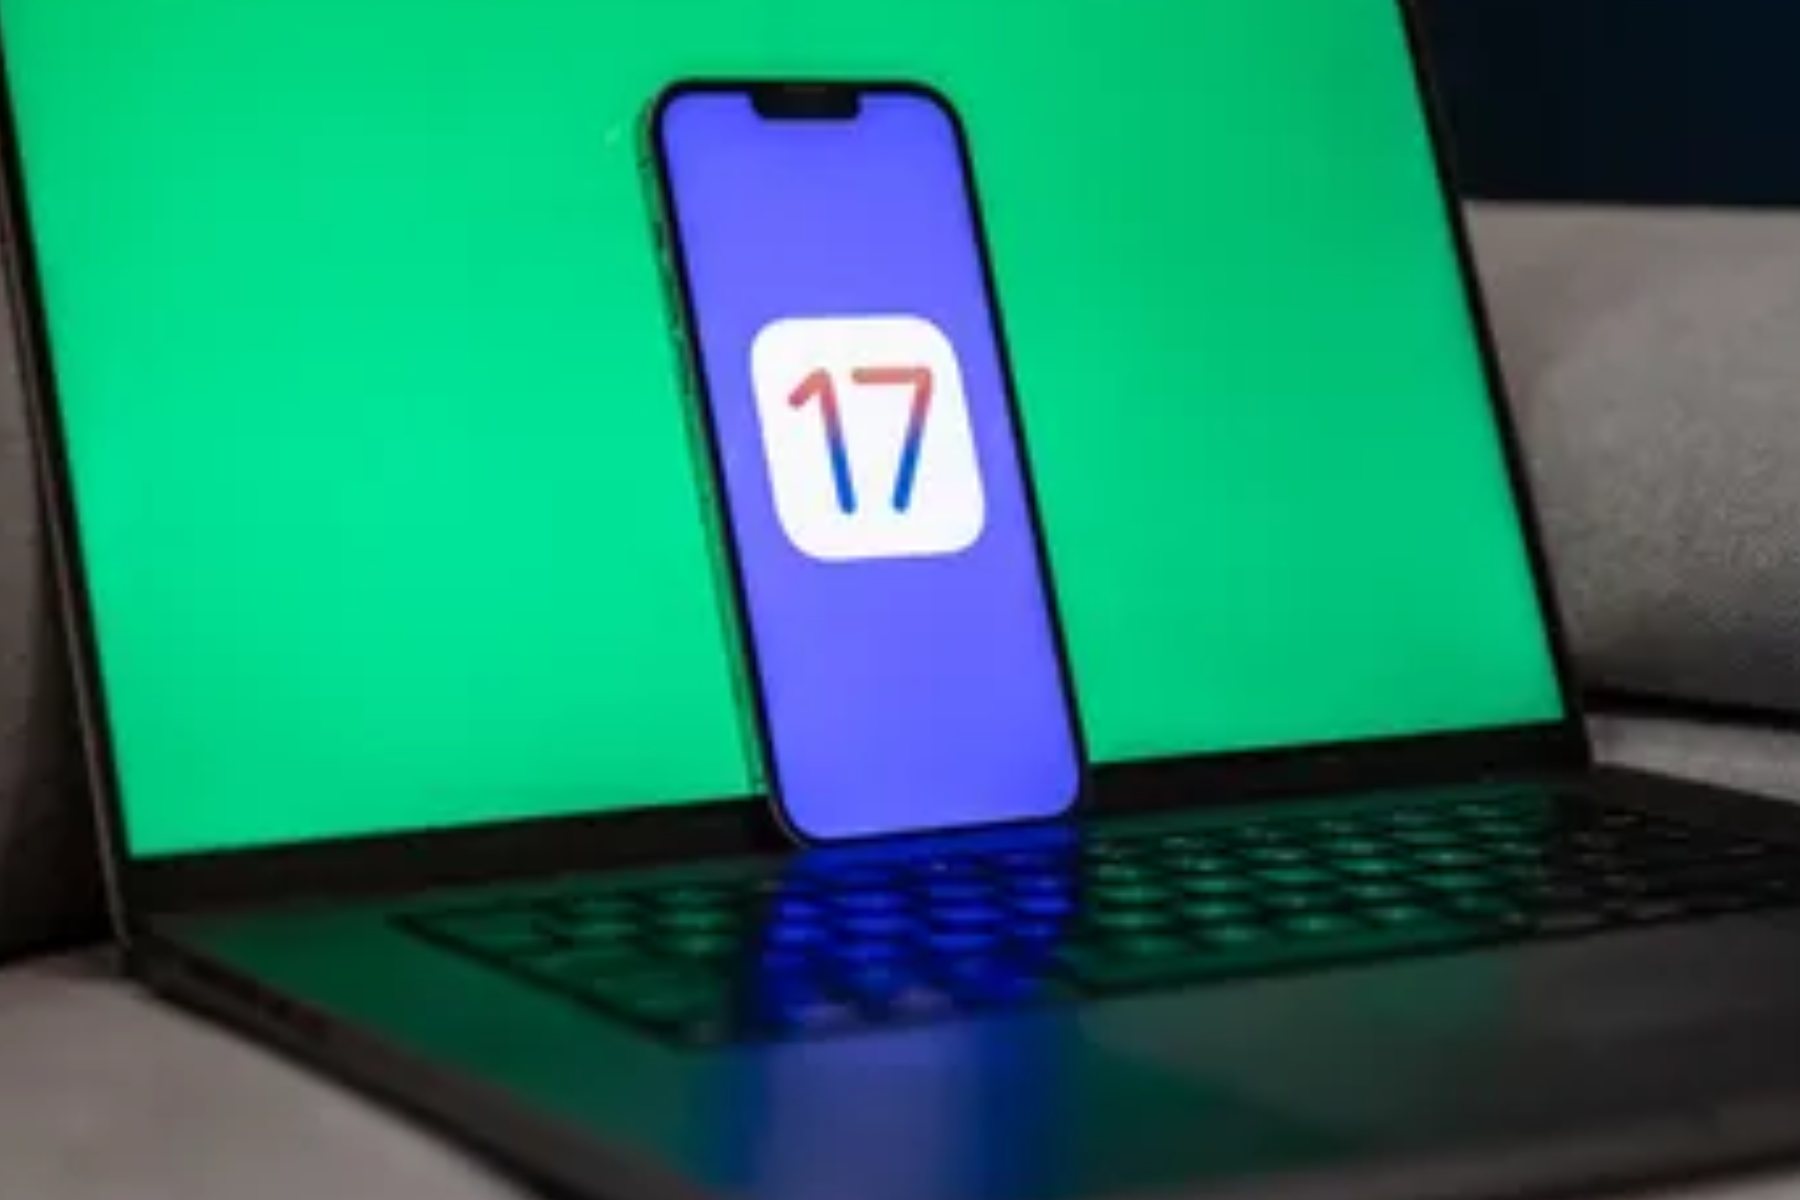 Monday Is The Day To Update Your IPhone To IOS 17 - Here's What You Need To Know